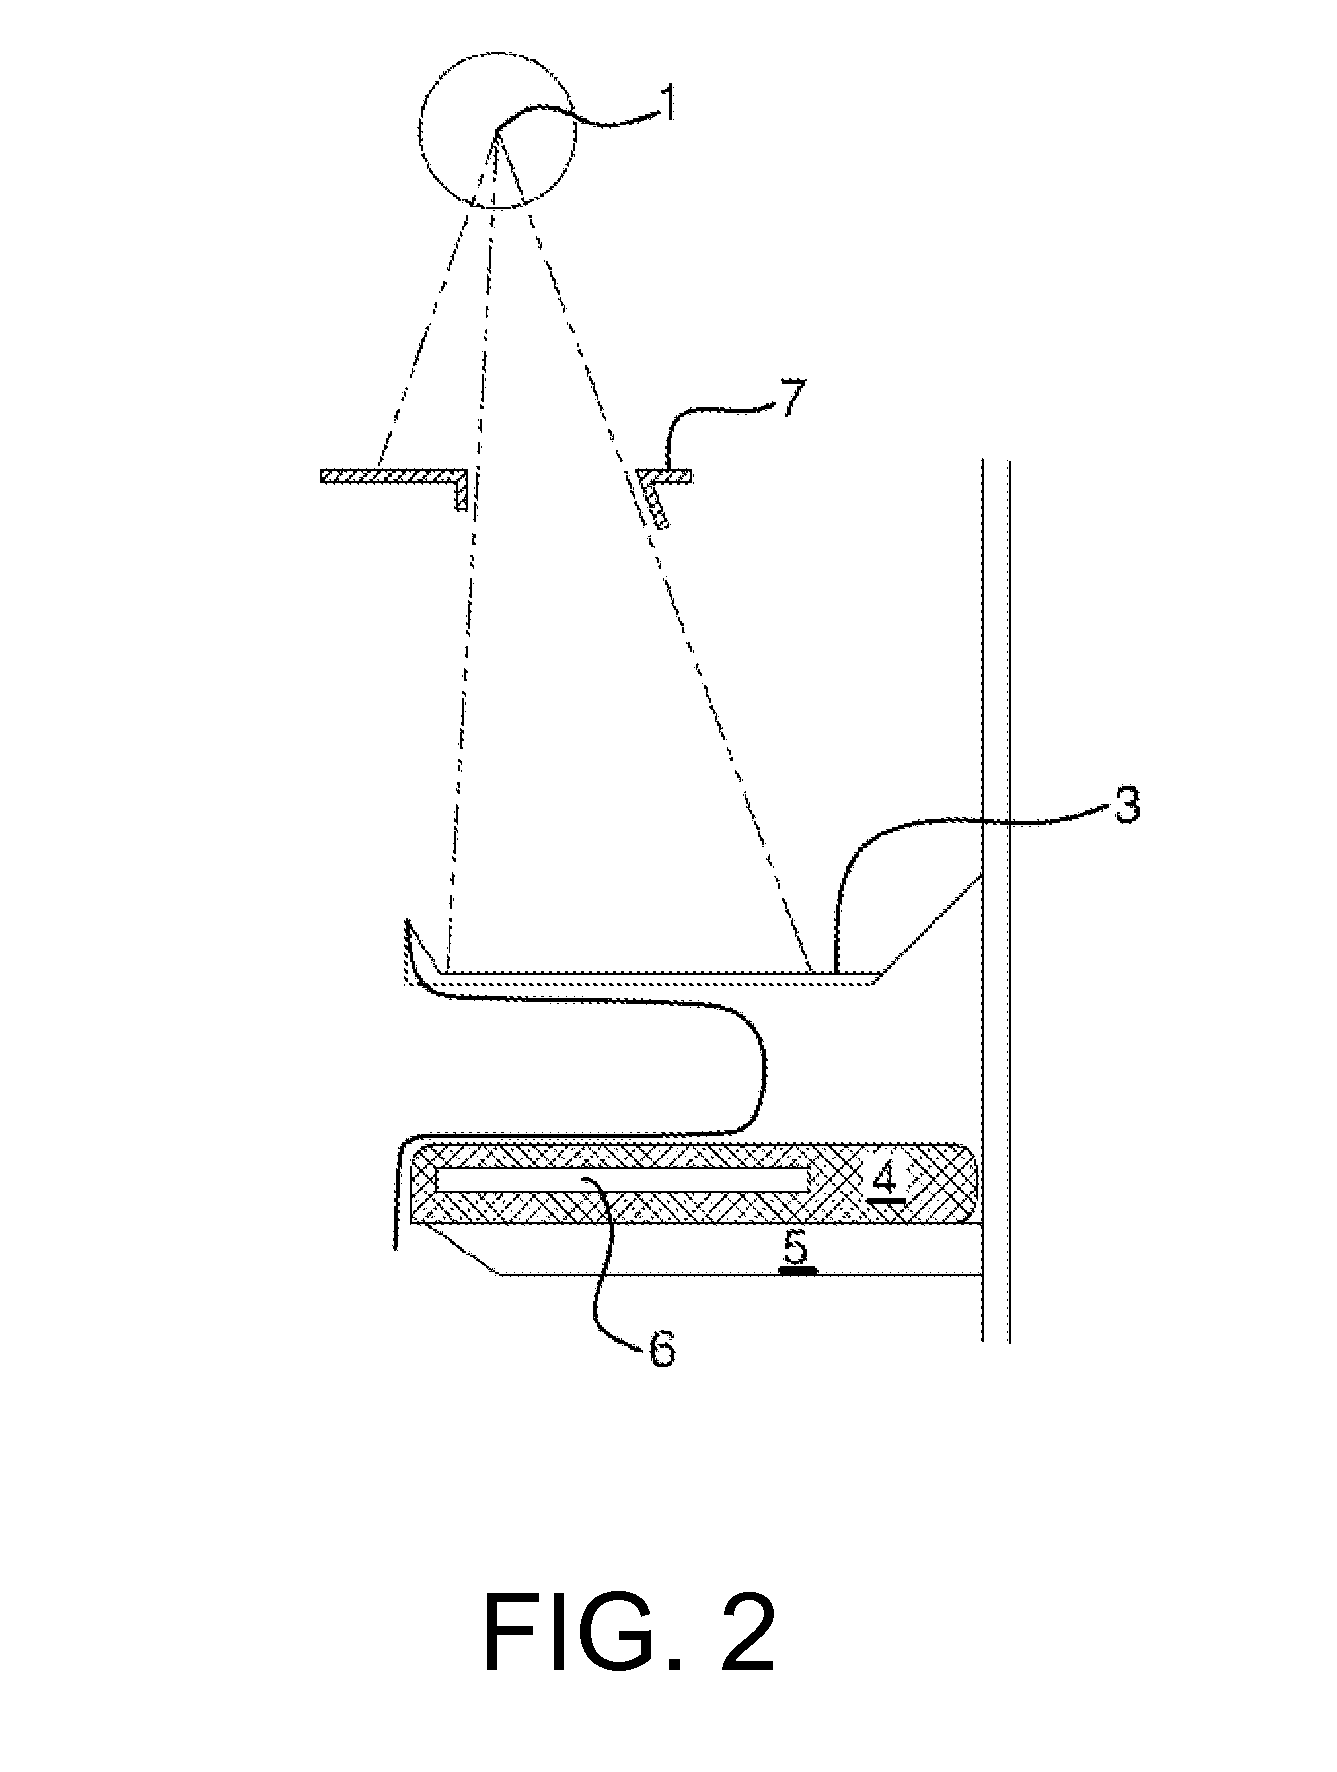 Mammography systems and methods, including methods utilizing breast sound comparison